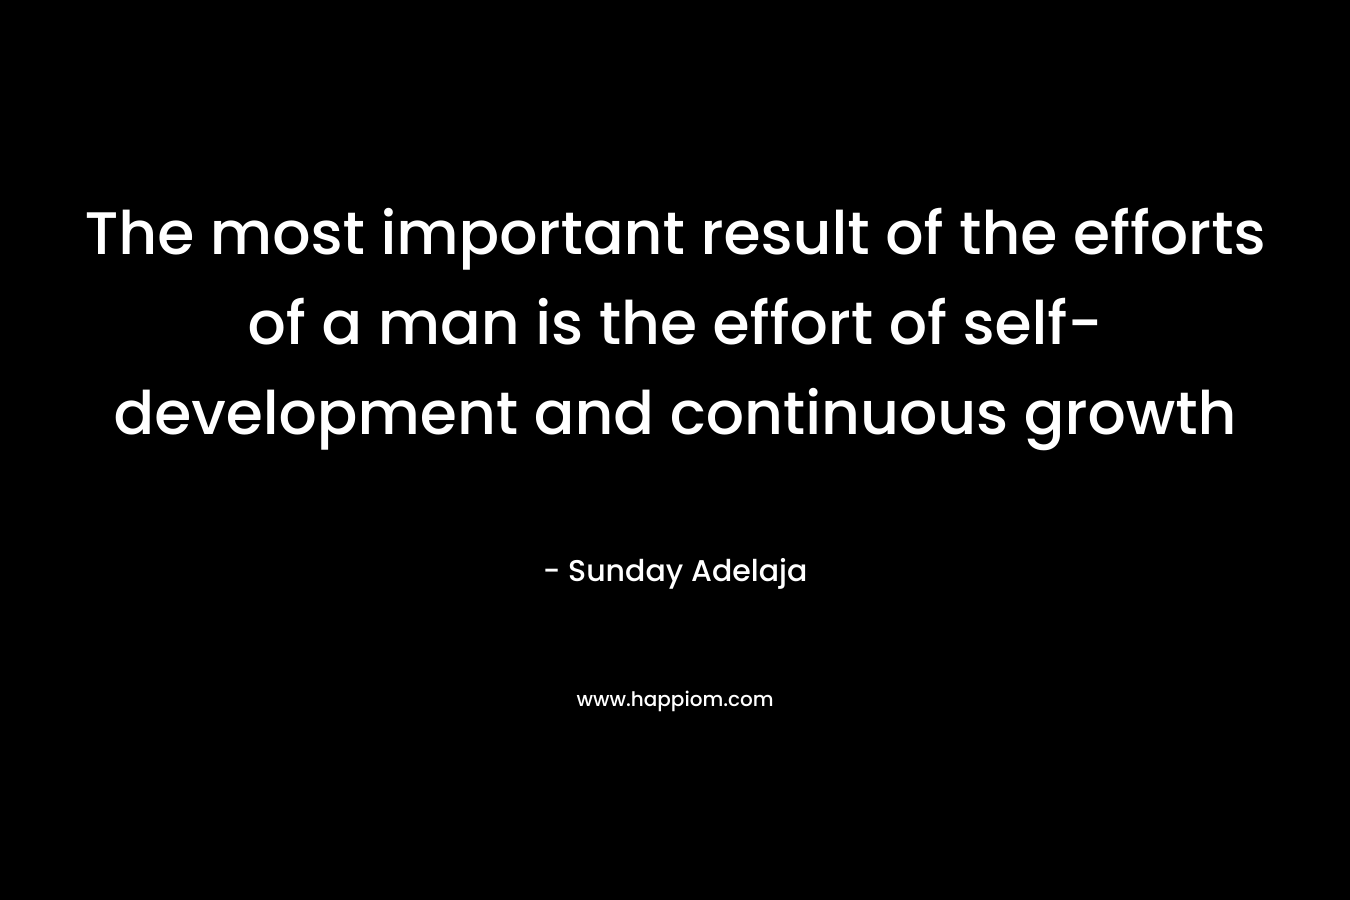 The most important result of the efforts of a man is the effort of self-development and continuous growth – Sunday Adelaja